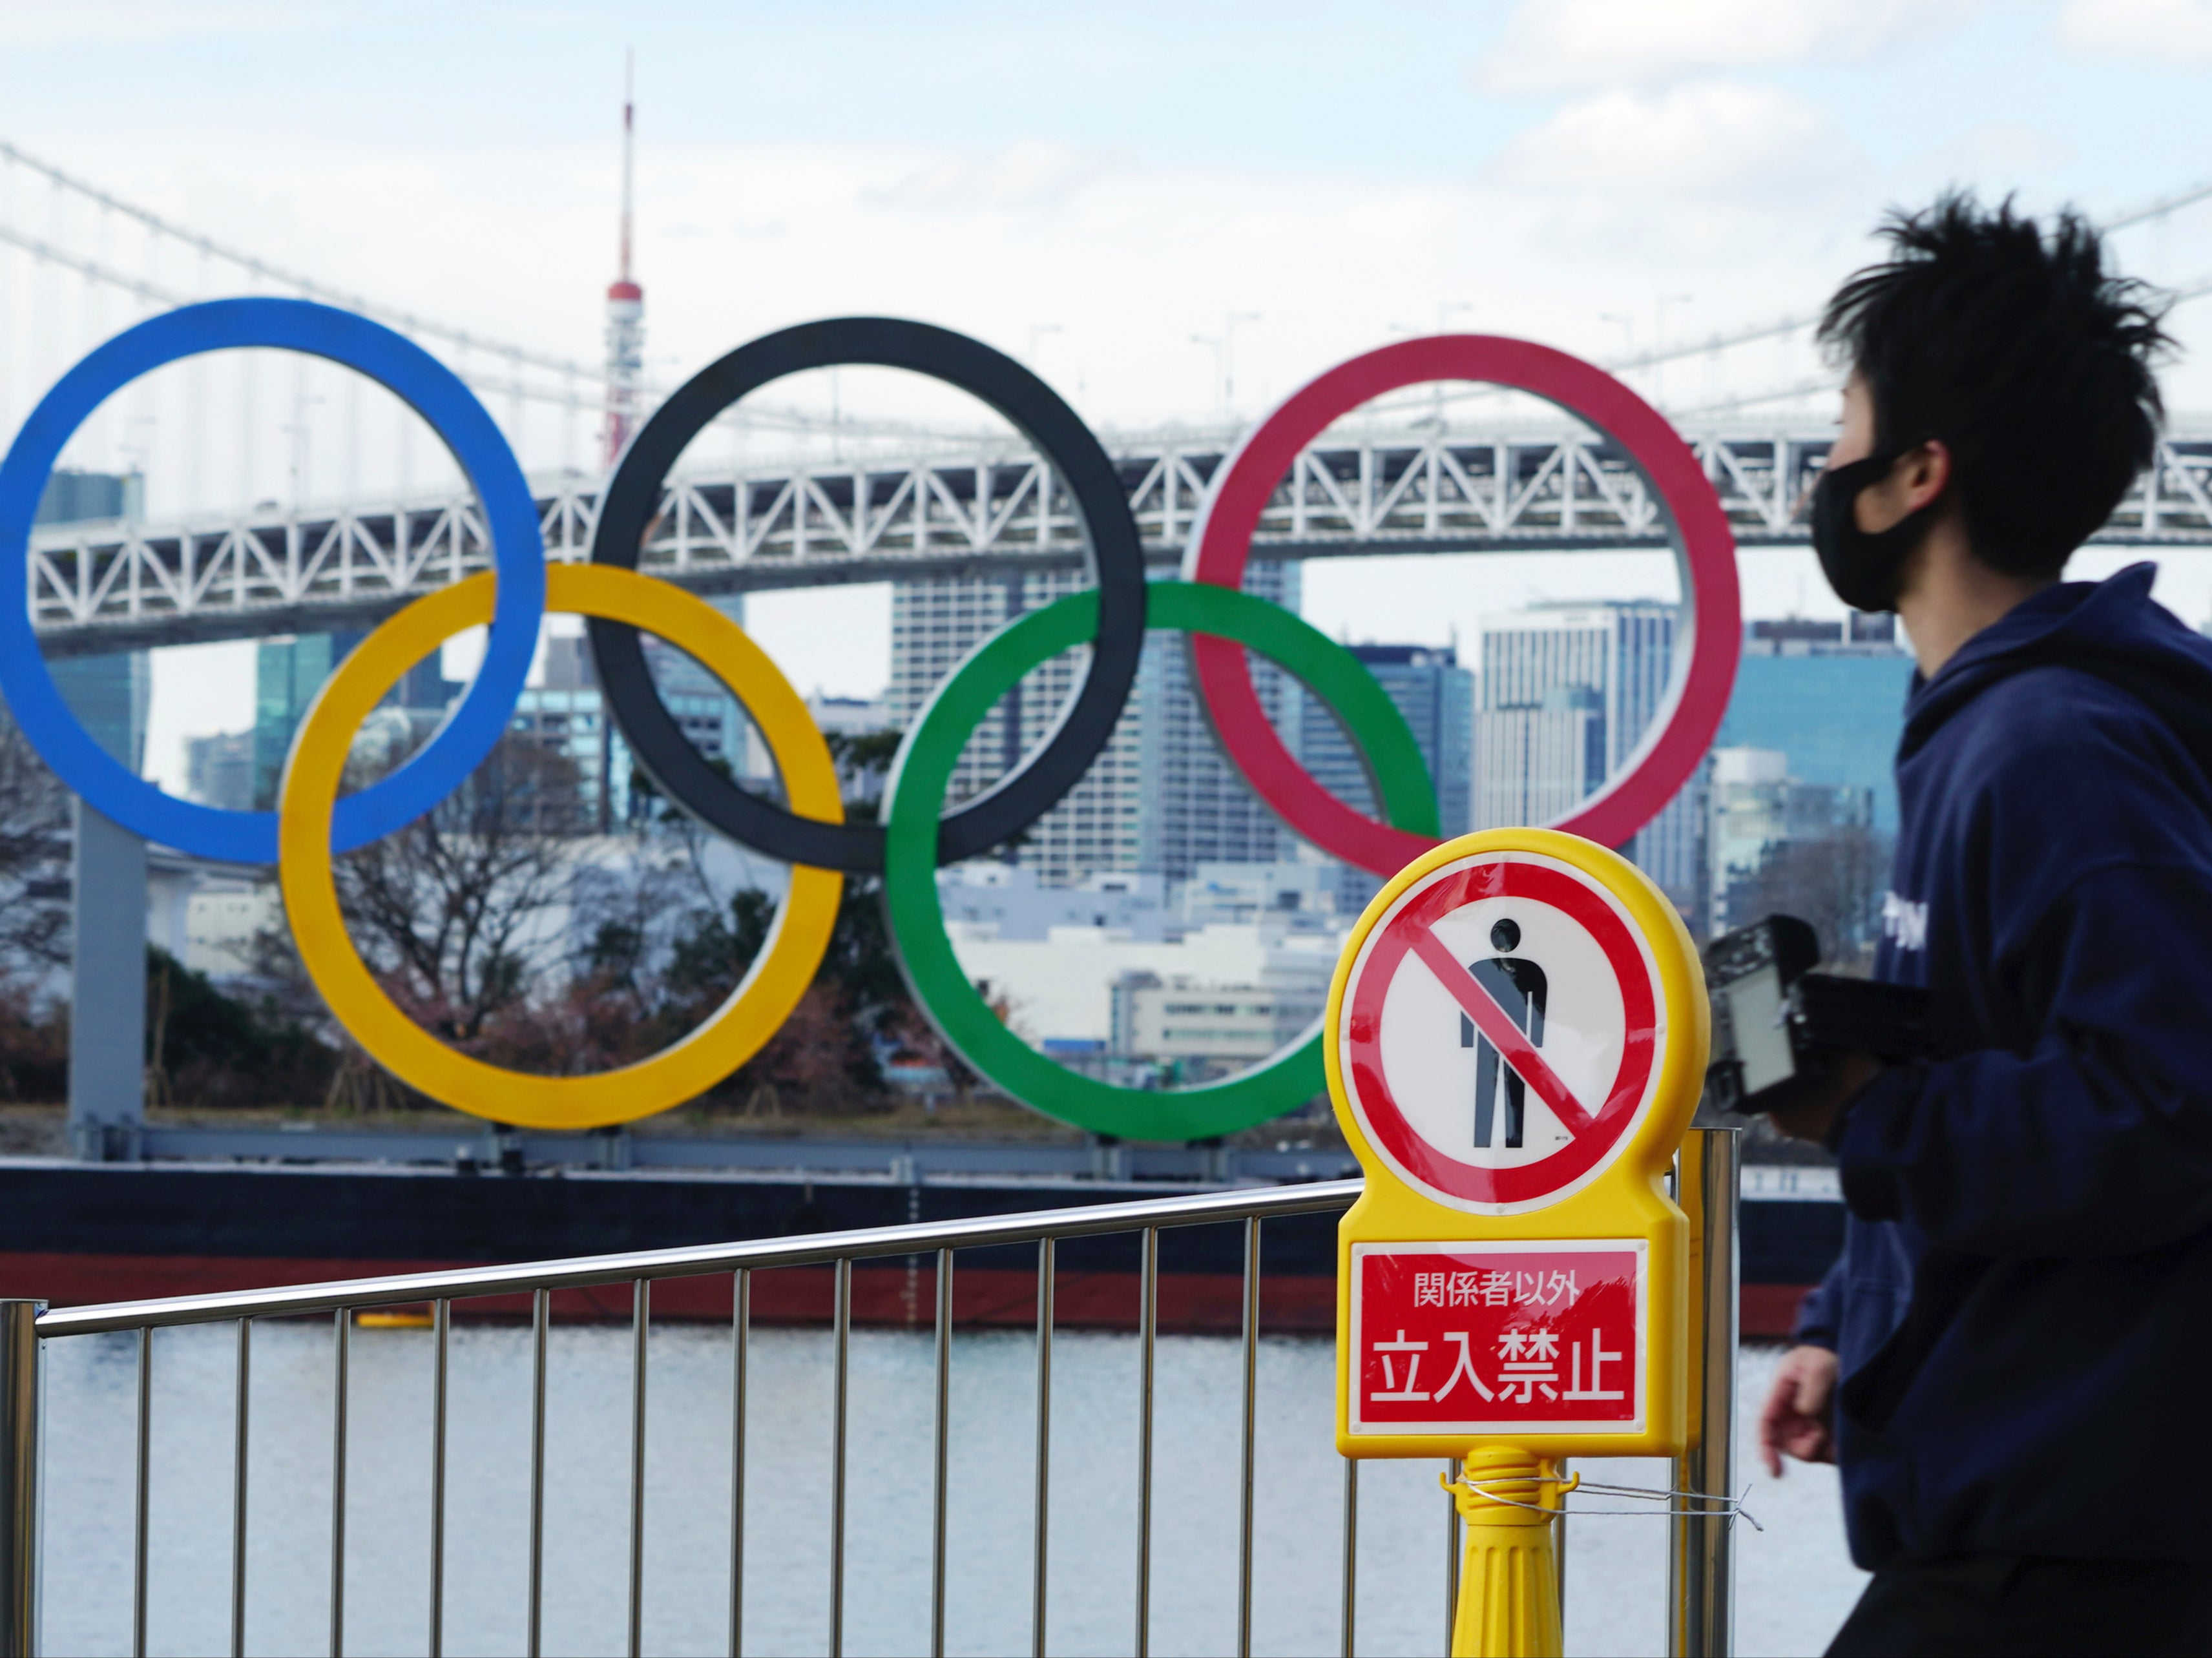 A man wearing a protective face mask walks near the Olympic rings